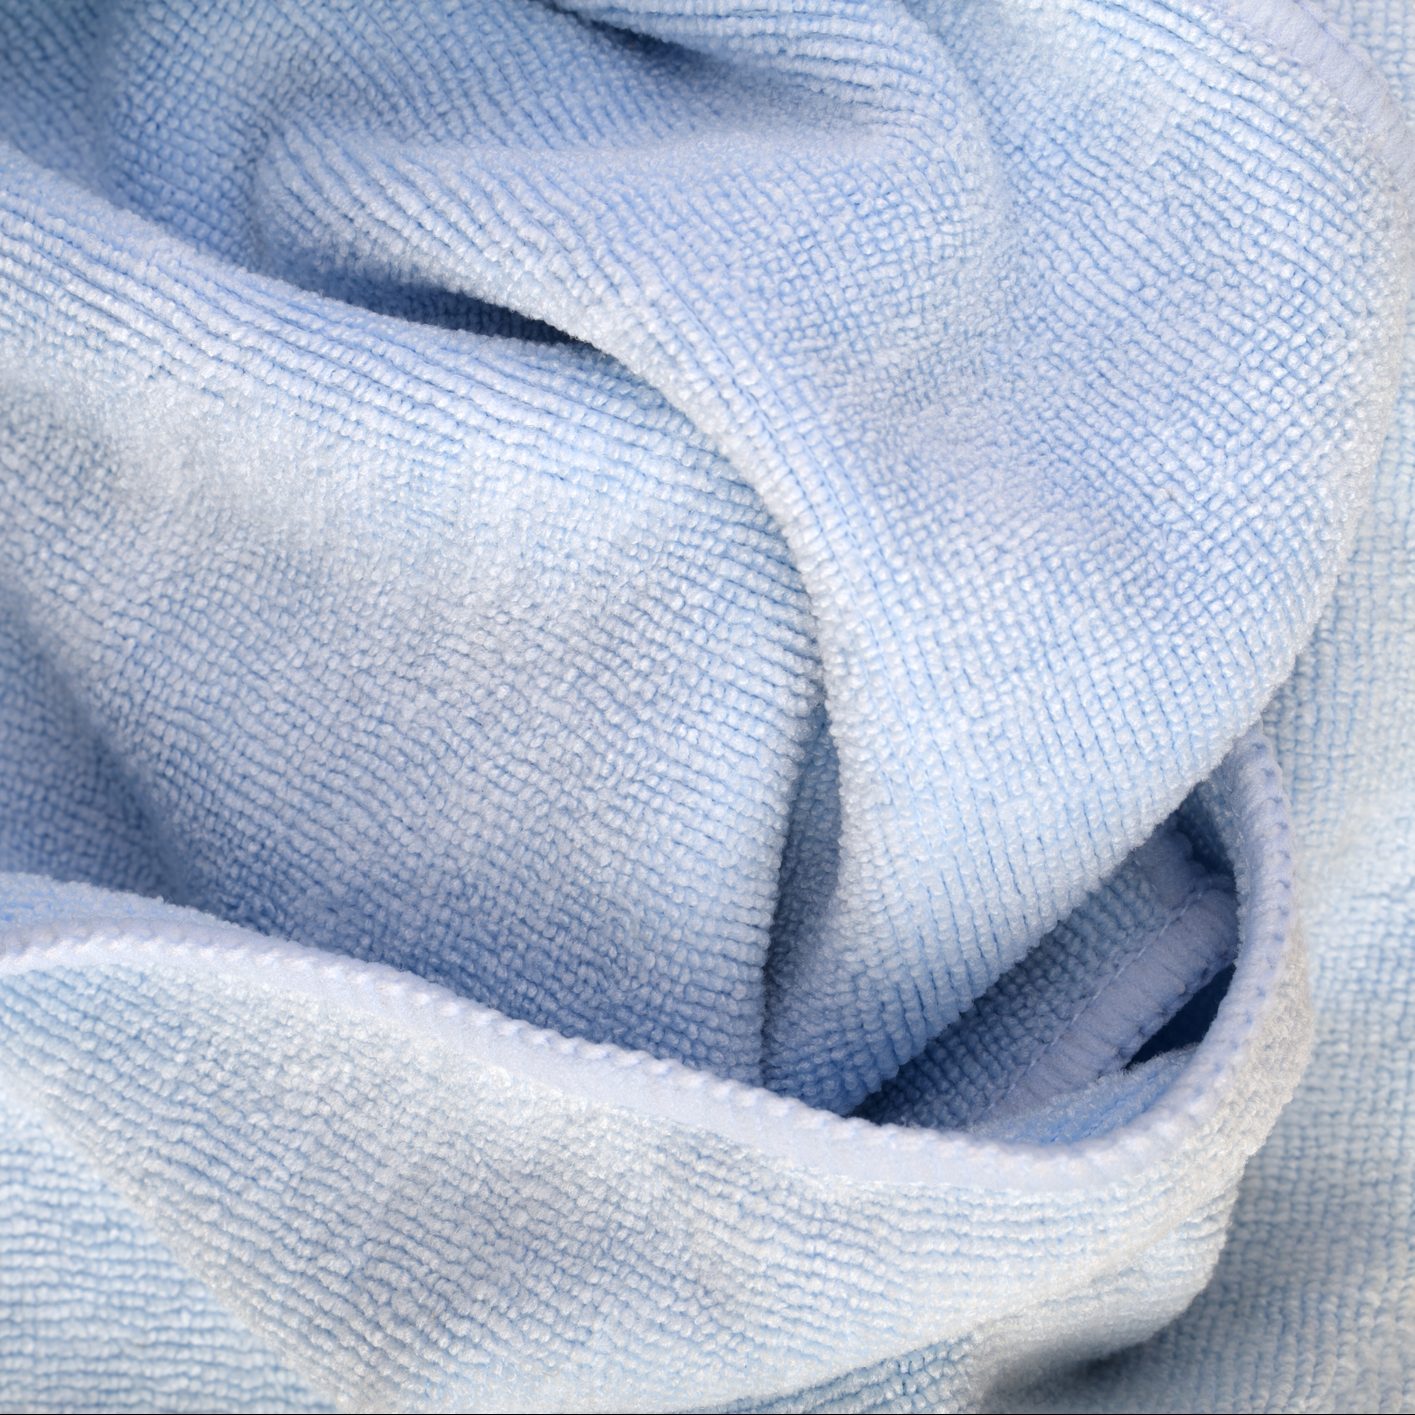 Do's and Dont's of Caring for Microfiber Cloths